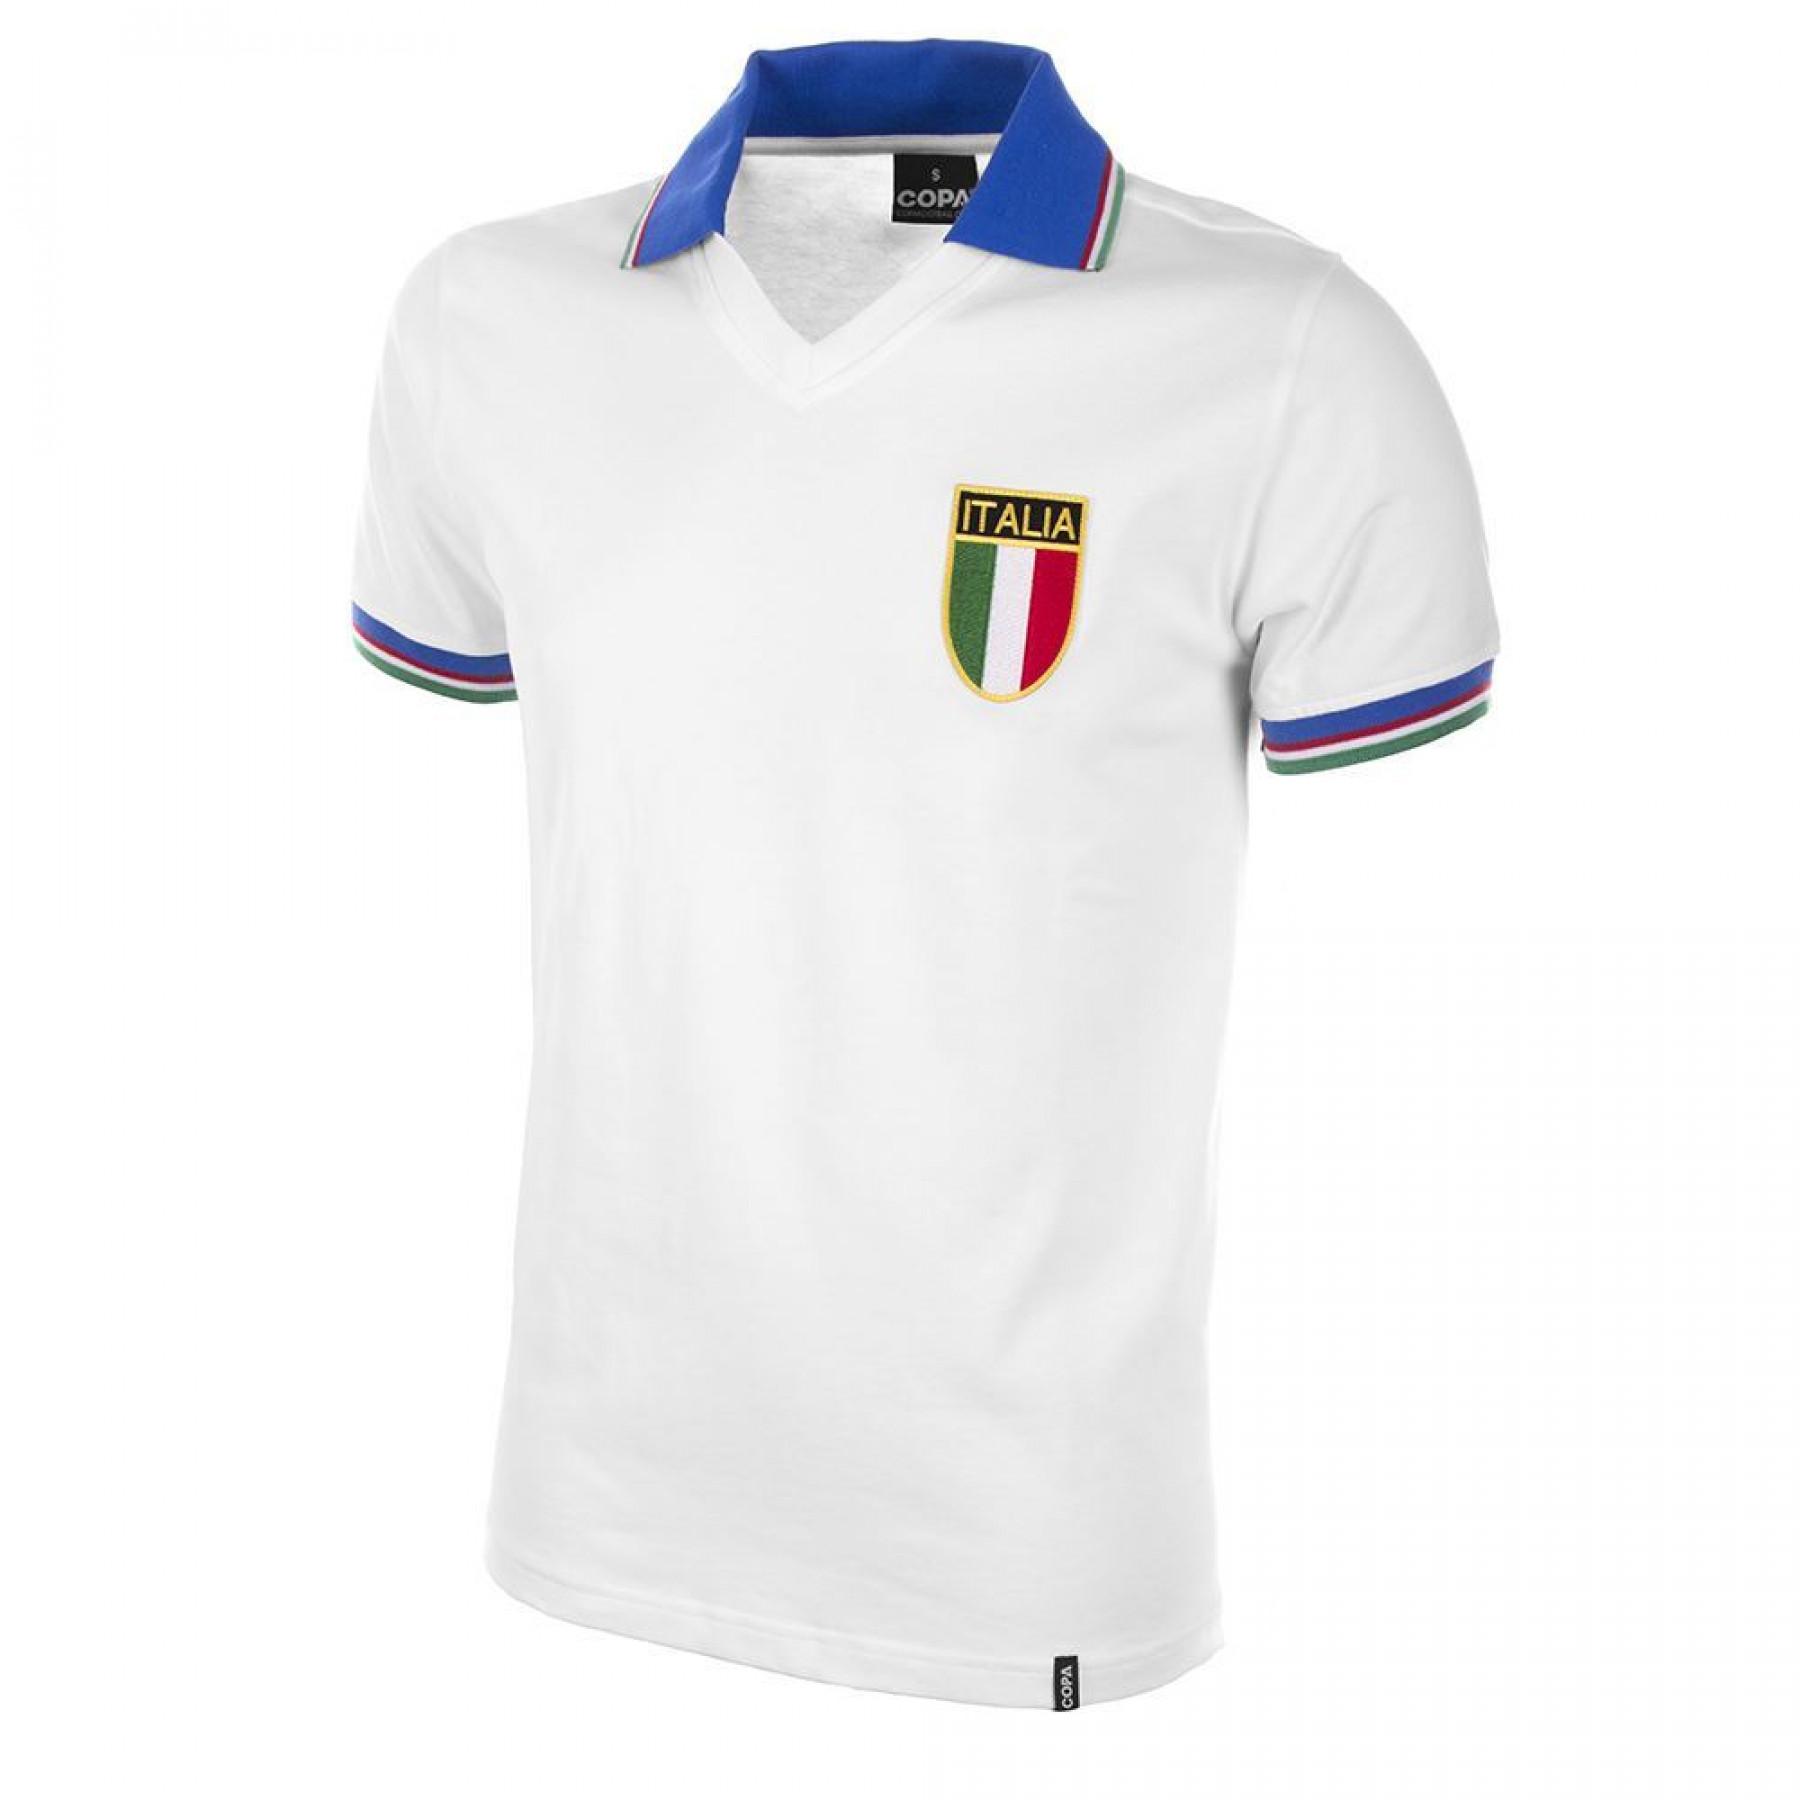 Away jersey Italie World Cup 1982